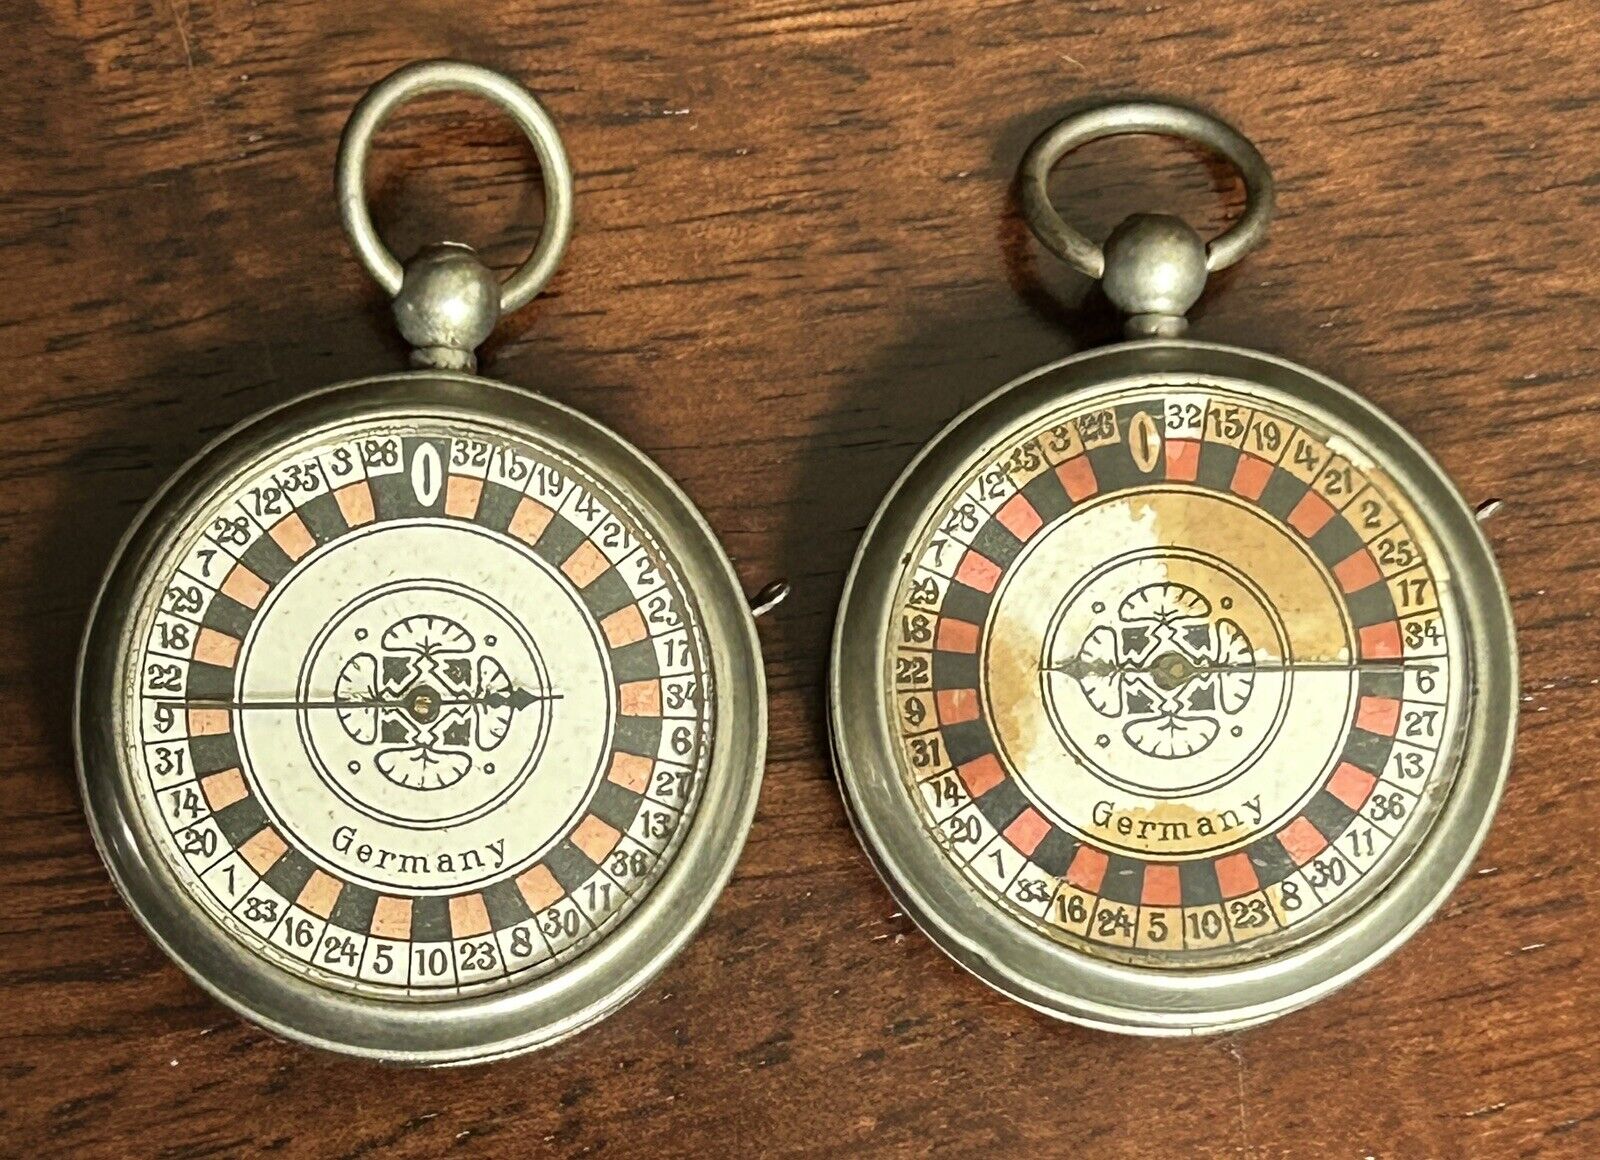 Lot of 2 • c.1920s Germany Roulette Pocket Watch Gambling Game Working VG+